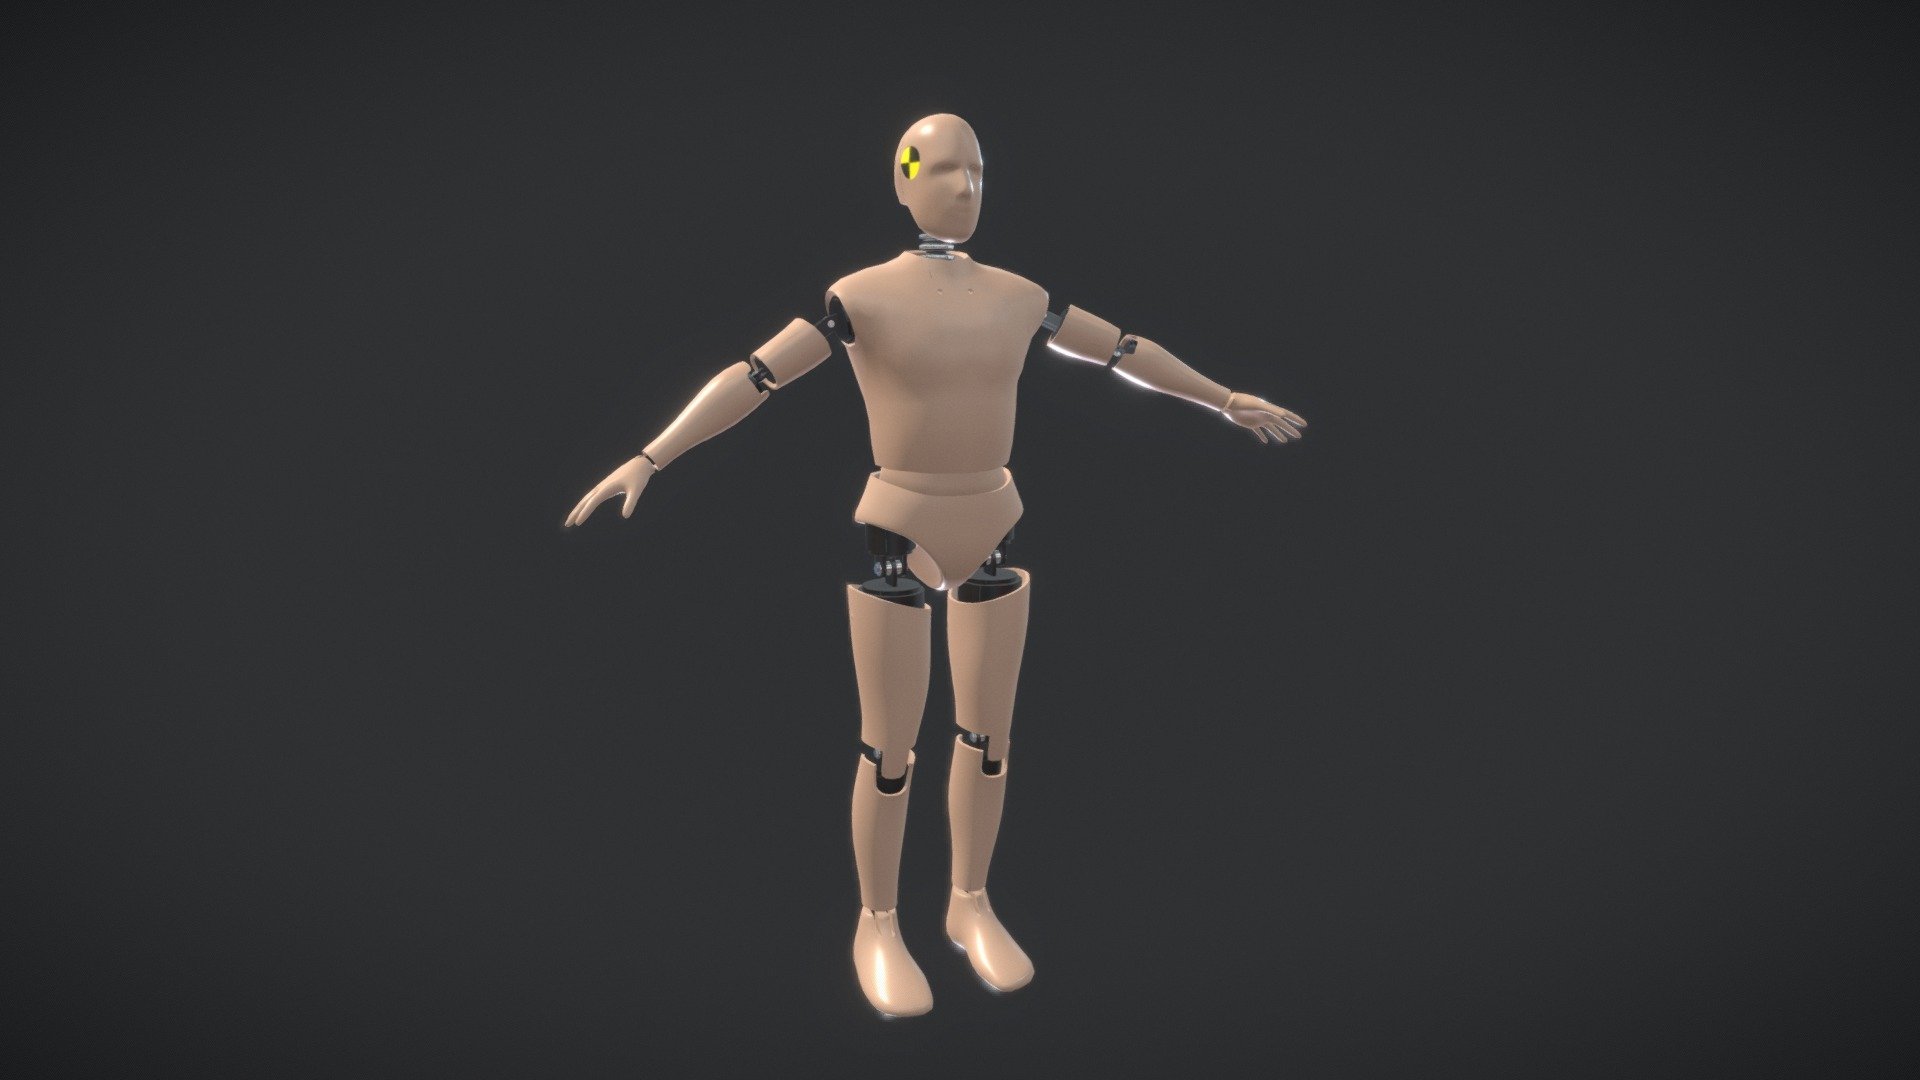 Perfect for simulations ◀

Includes the .blend file with the rigging controls for posing.

[ Preview: https://youtu.be/5ZgO8bpSX-g?si=o2m0n16gz6LXCX5H ] - Crash Test Dummy - Rigged - Buy Royalty Free 3D model by Luciano O. Mollo (@LM3D) 3d model